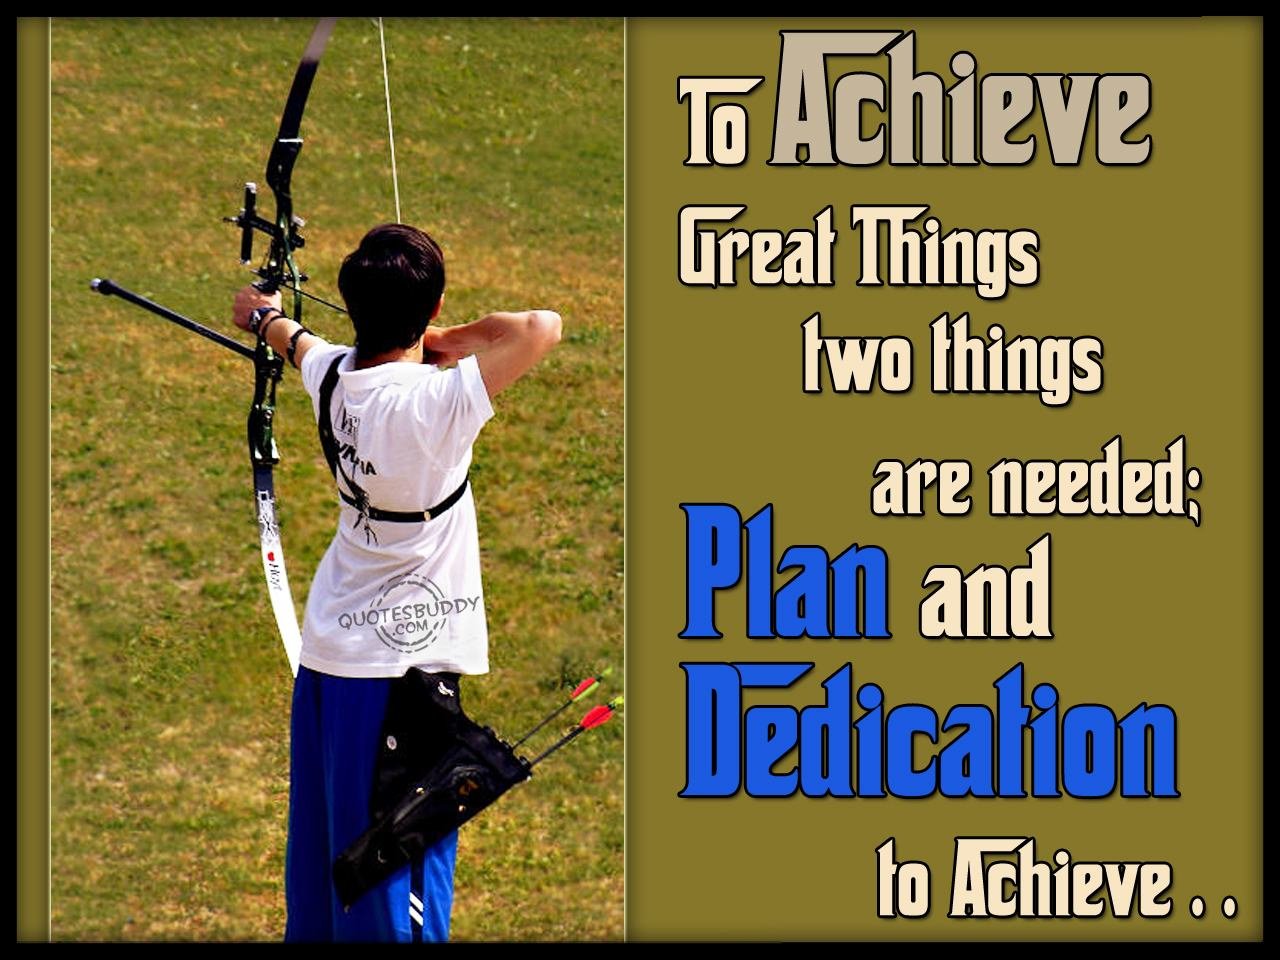 To achieve great things two things are needed plan and dedication to achieve